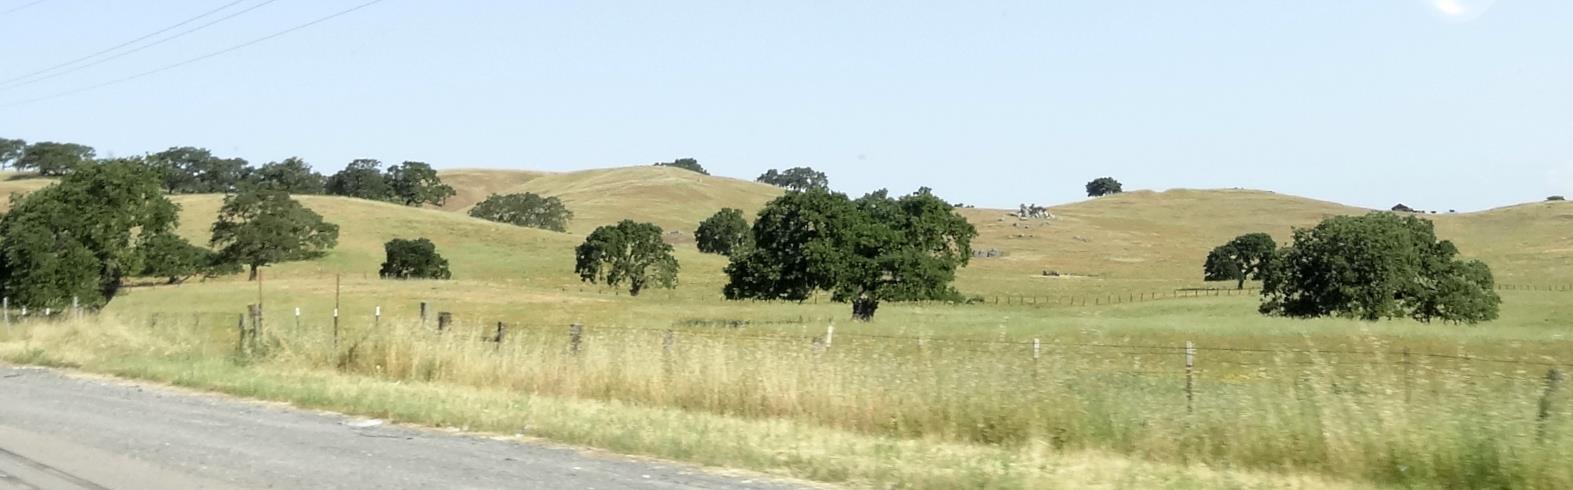 This is pretty typical of what you see along the hiway. This is what you would see all the way inland until you are through Napa and the Wine Country.